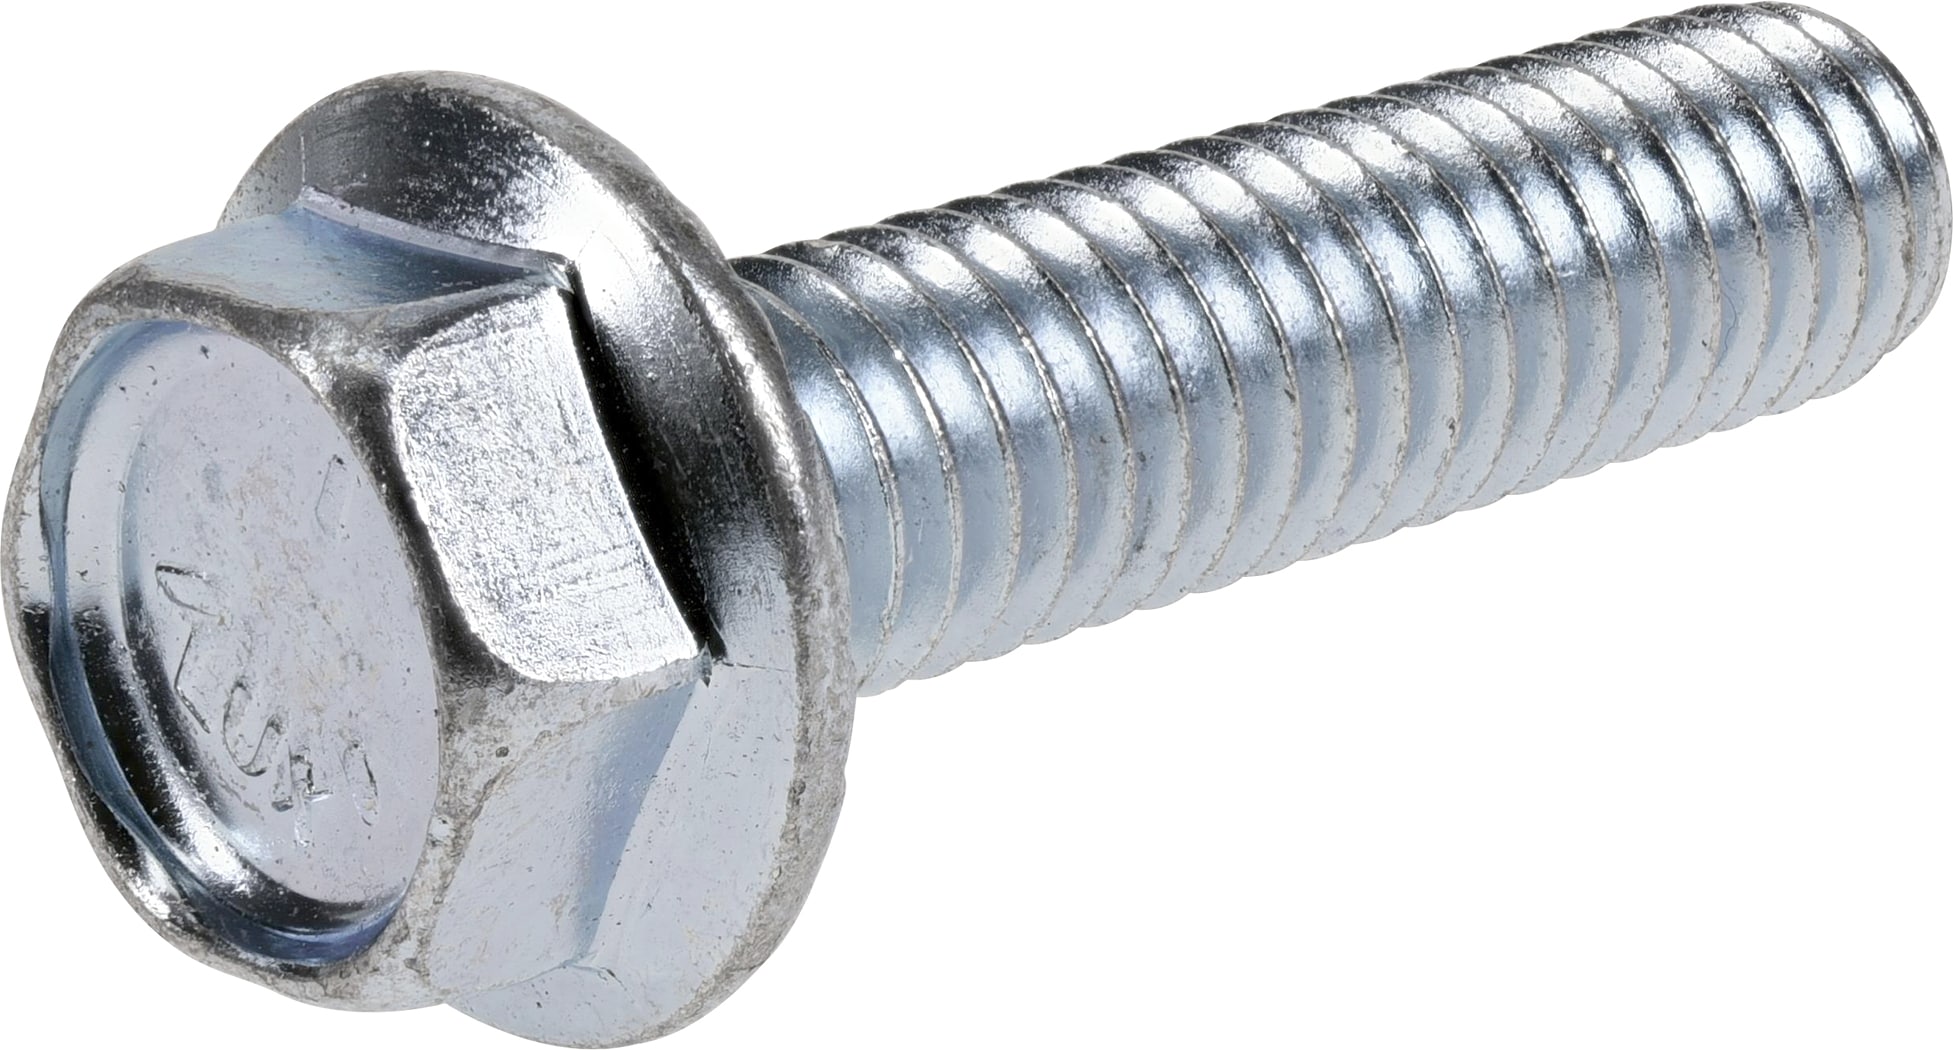 Qty 25 Stainless Steel Hex Cap Serrated Flange Bolt FT UNC #12-24 x 3/4" 